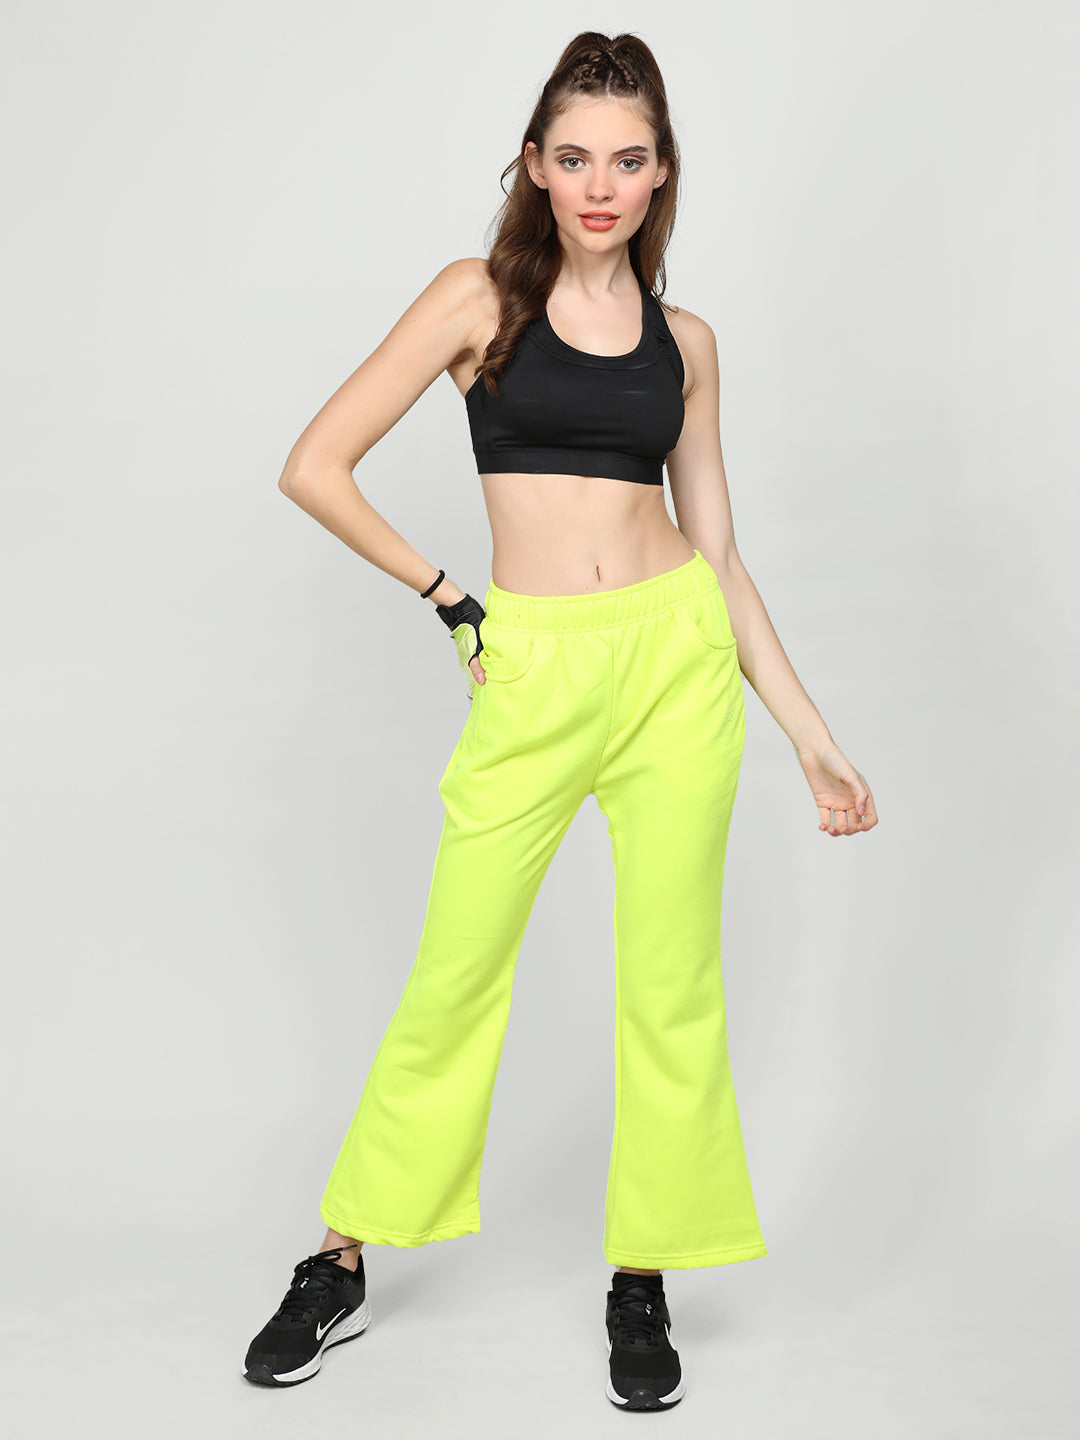 Women's Bellbottom Trackpant Workout Lower